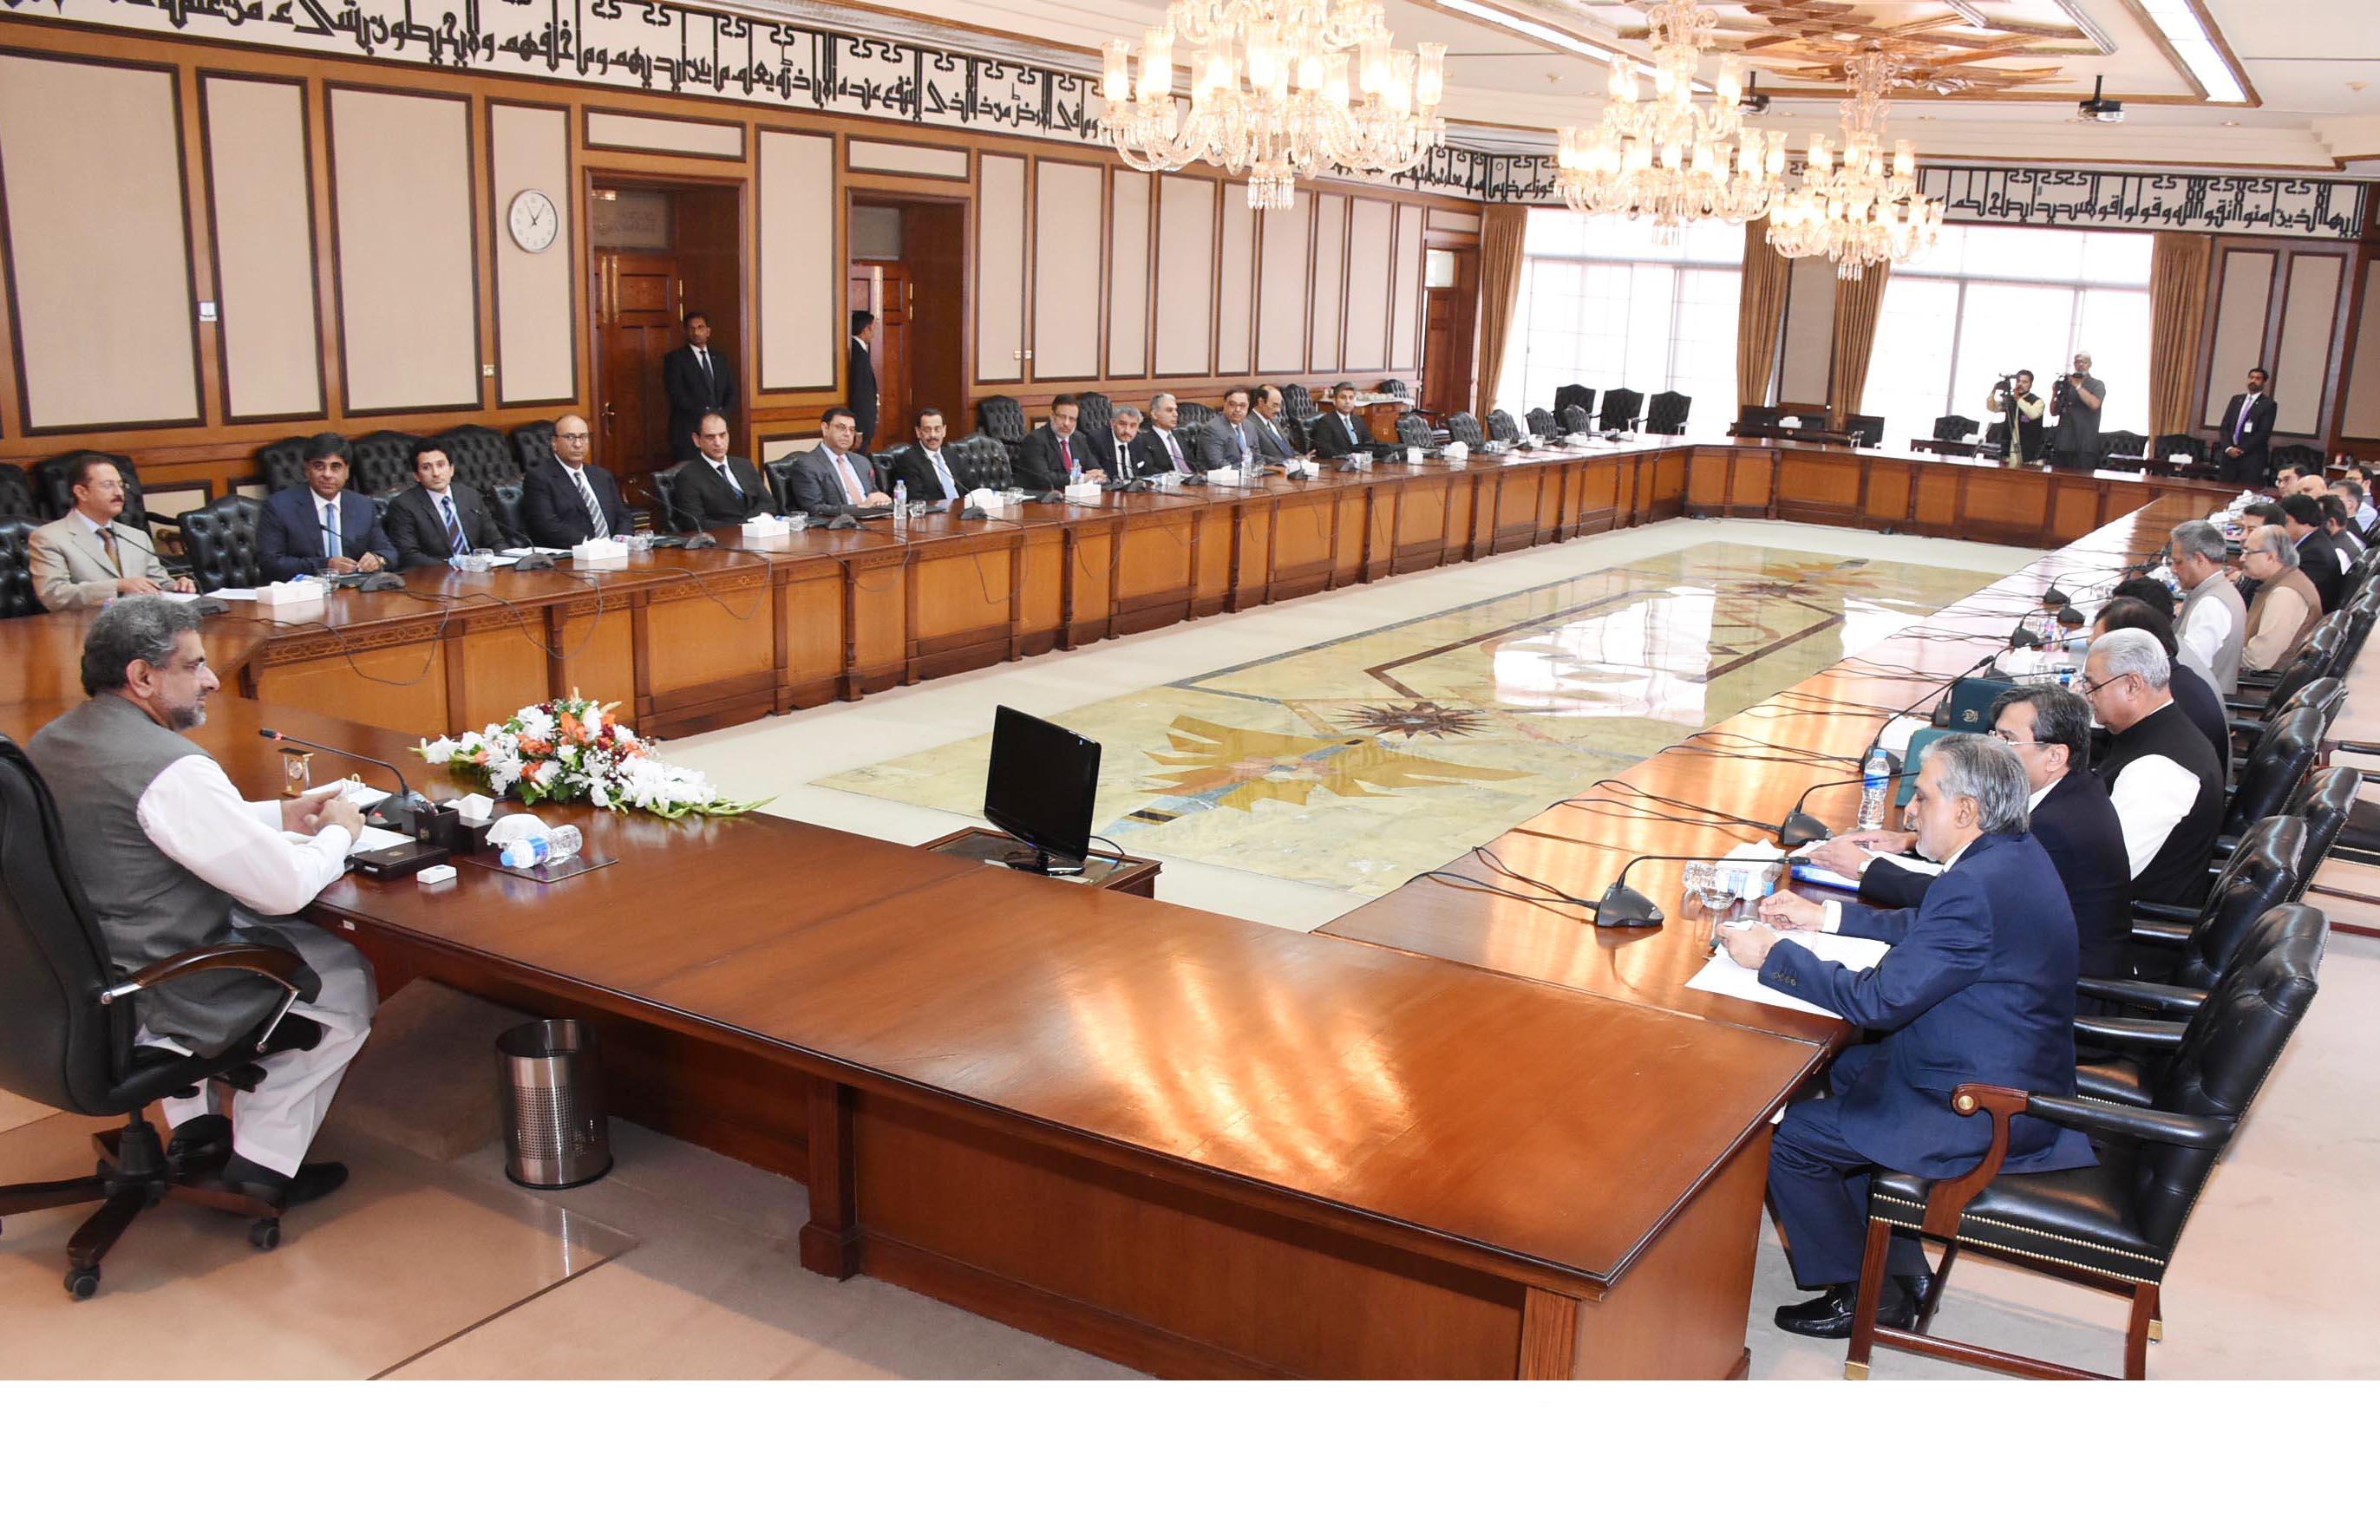 Prime Minister Shahid Khaqan Abbasi in a meeting with a delegation of All Pakistan Textile Mills Association (APTMA) at Prime Ministers Office in Islamabad on October 13, 2017